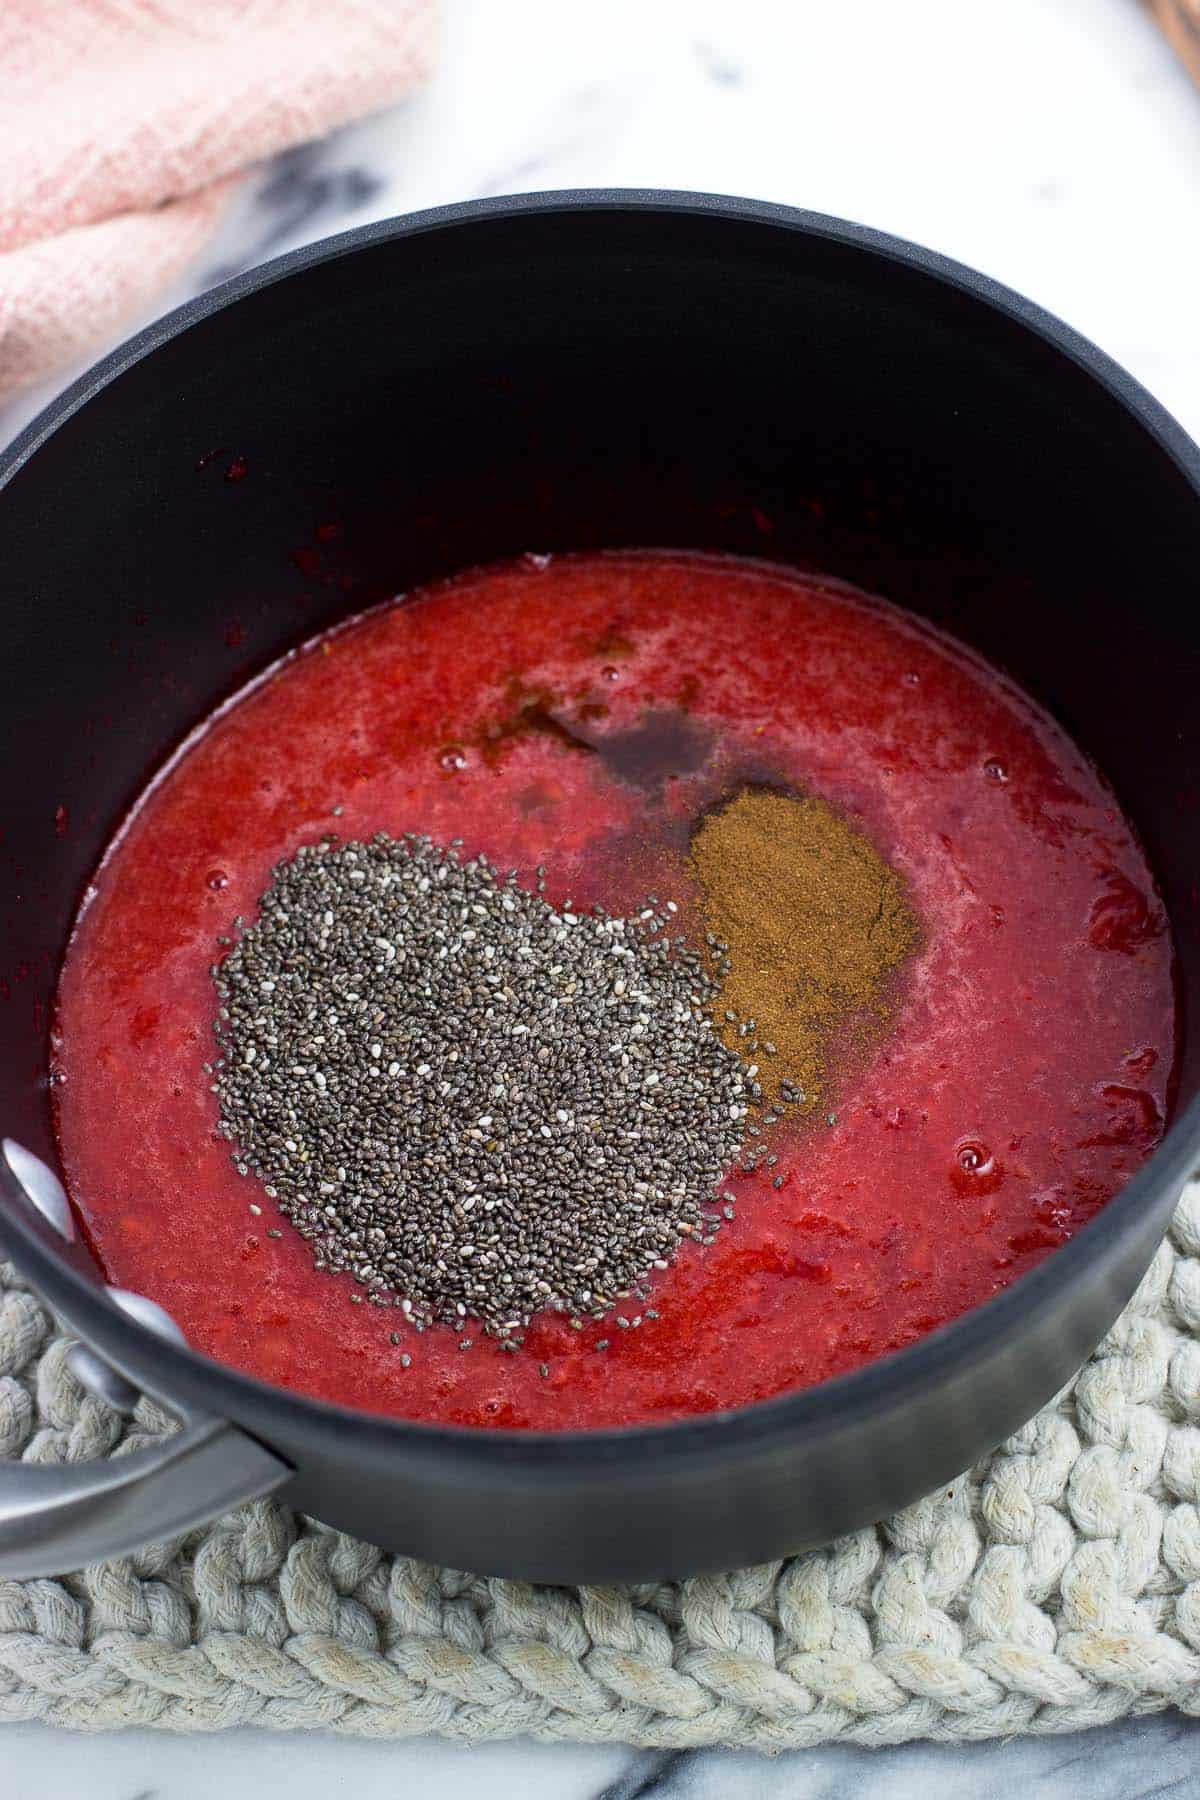 Mashed strawberry puree in a saucepan with chia seeds, cinnamon, and vanilla extract poured in.